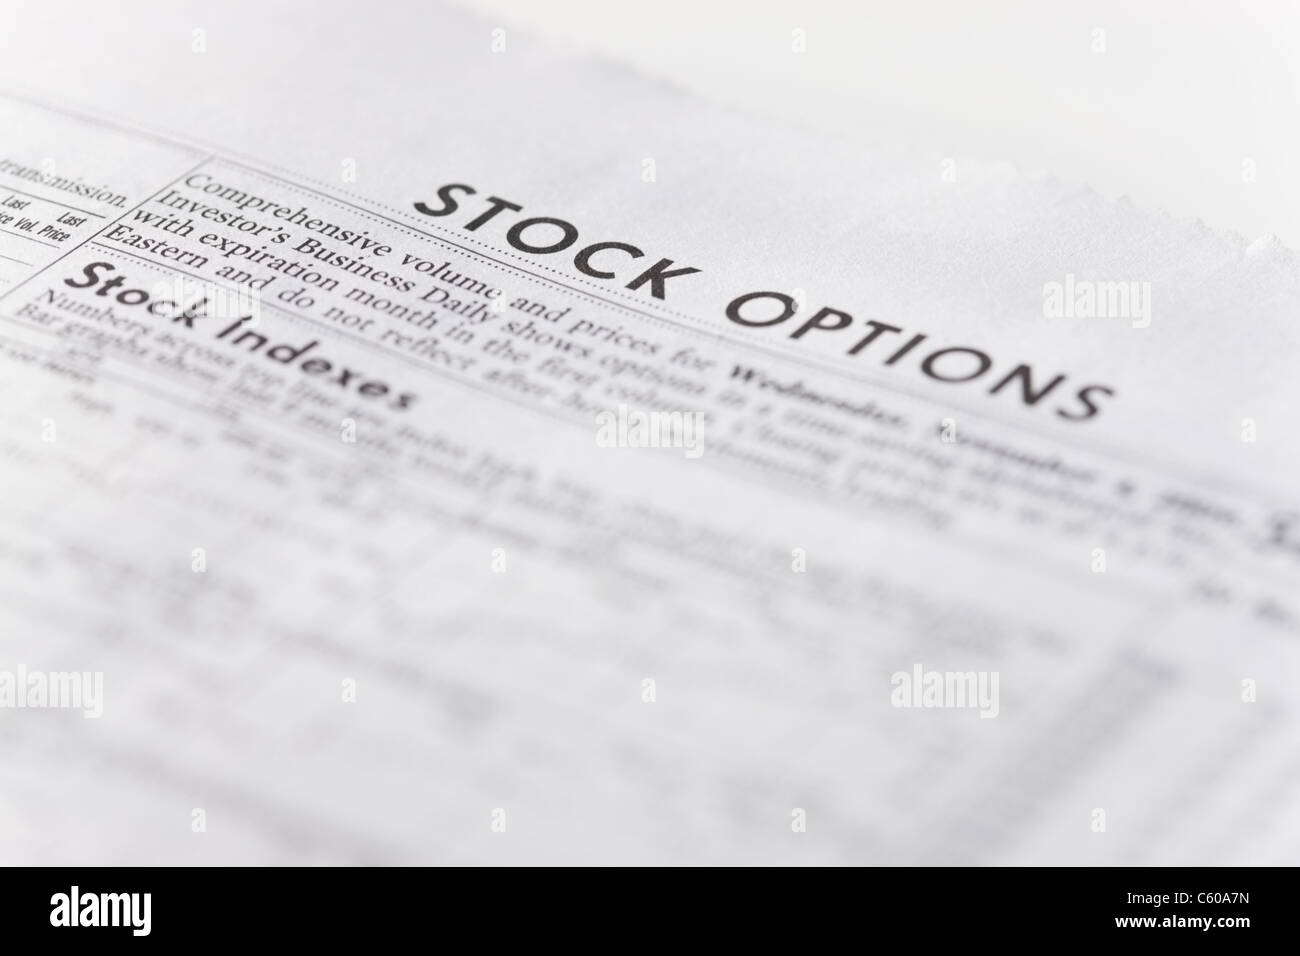 USA, Illinois, Metamora, Close-up of stock quotes in newspaper Stock Photo